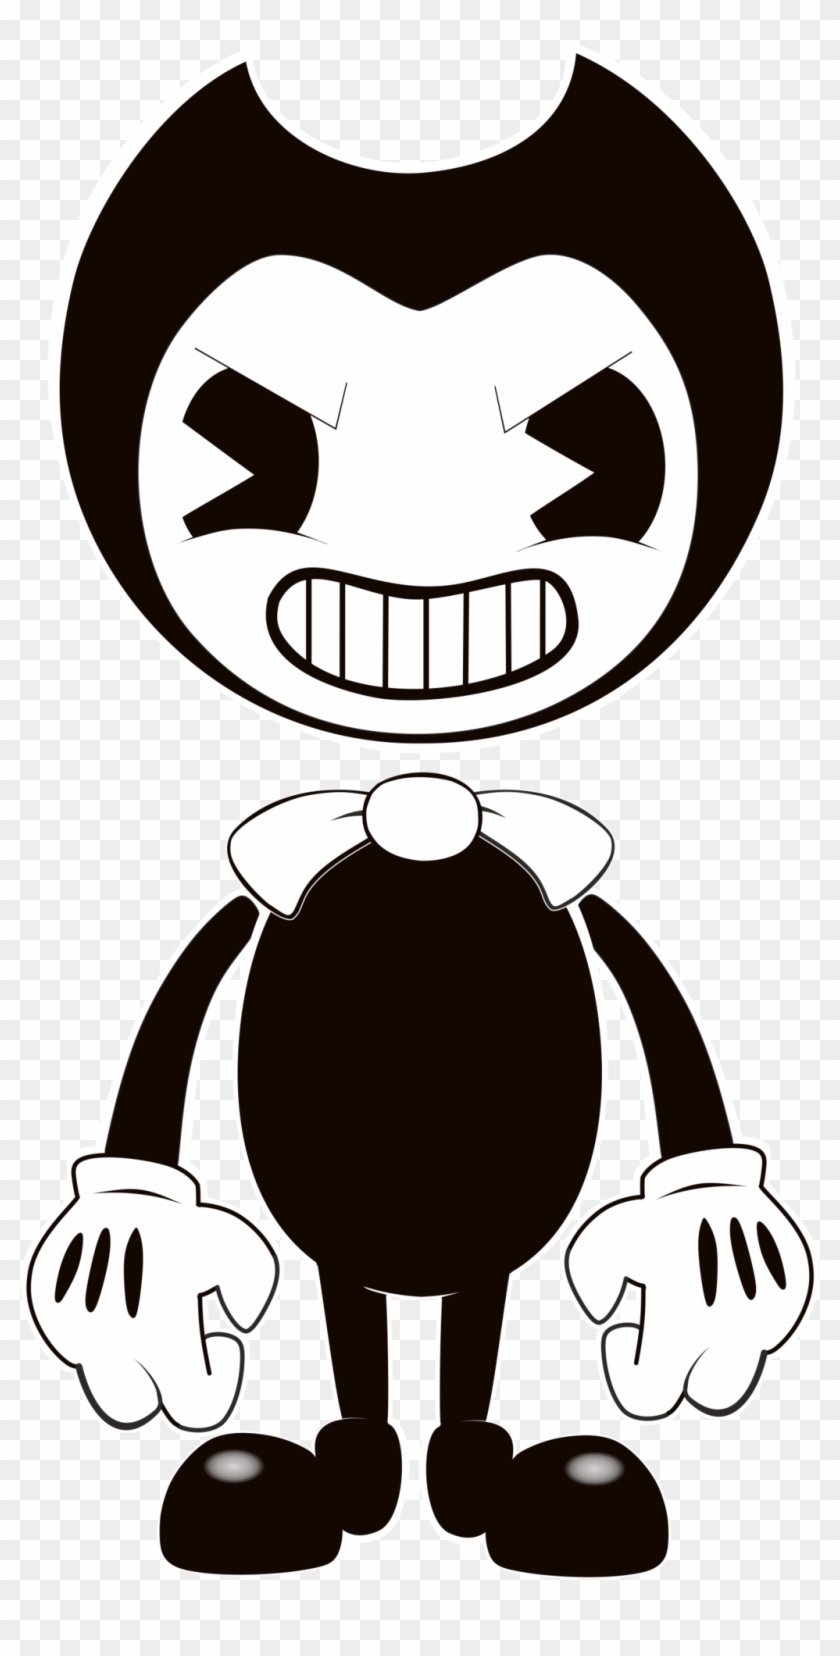 Fla Coming Soon) By Sporealtair Bendy Vector Art (.fla - Bendy And The Ink Machine Bendy Cardboard Cutout #1210327